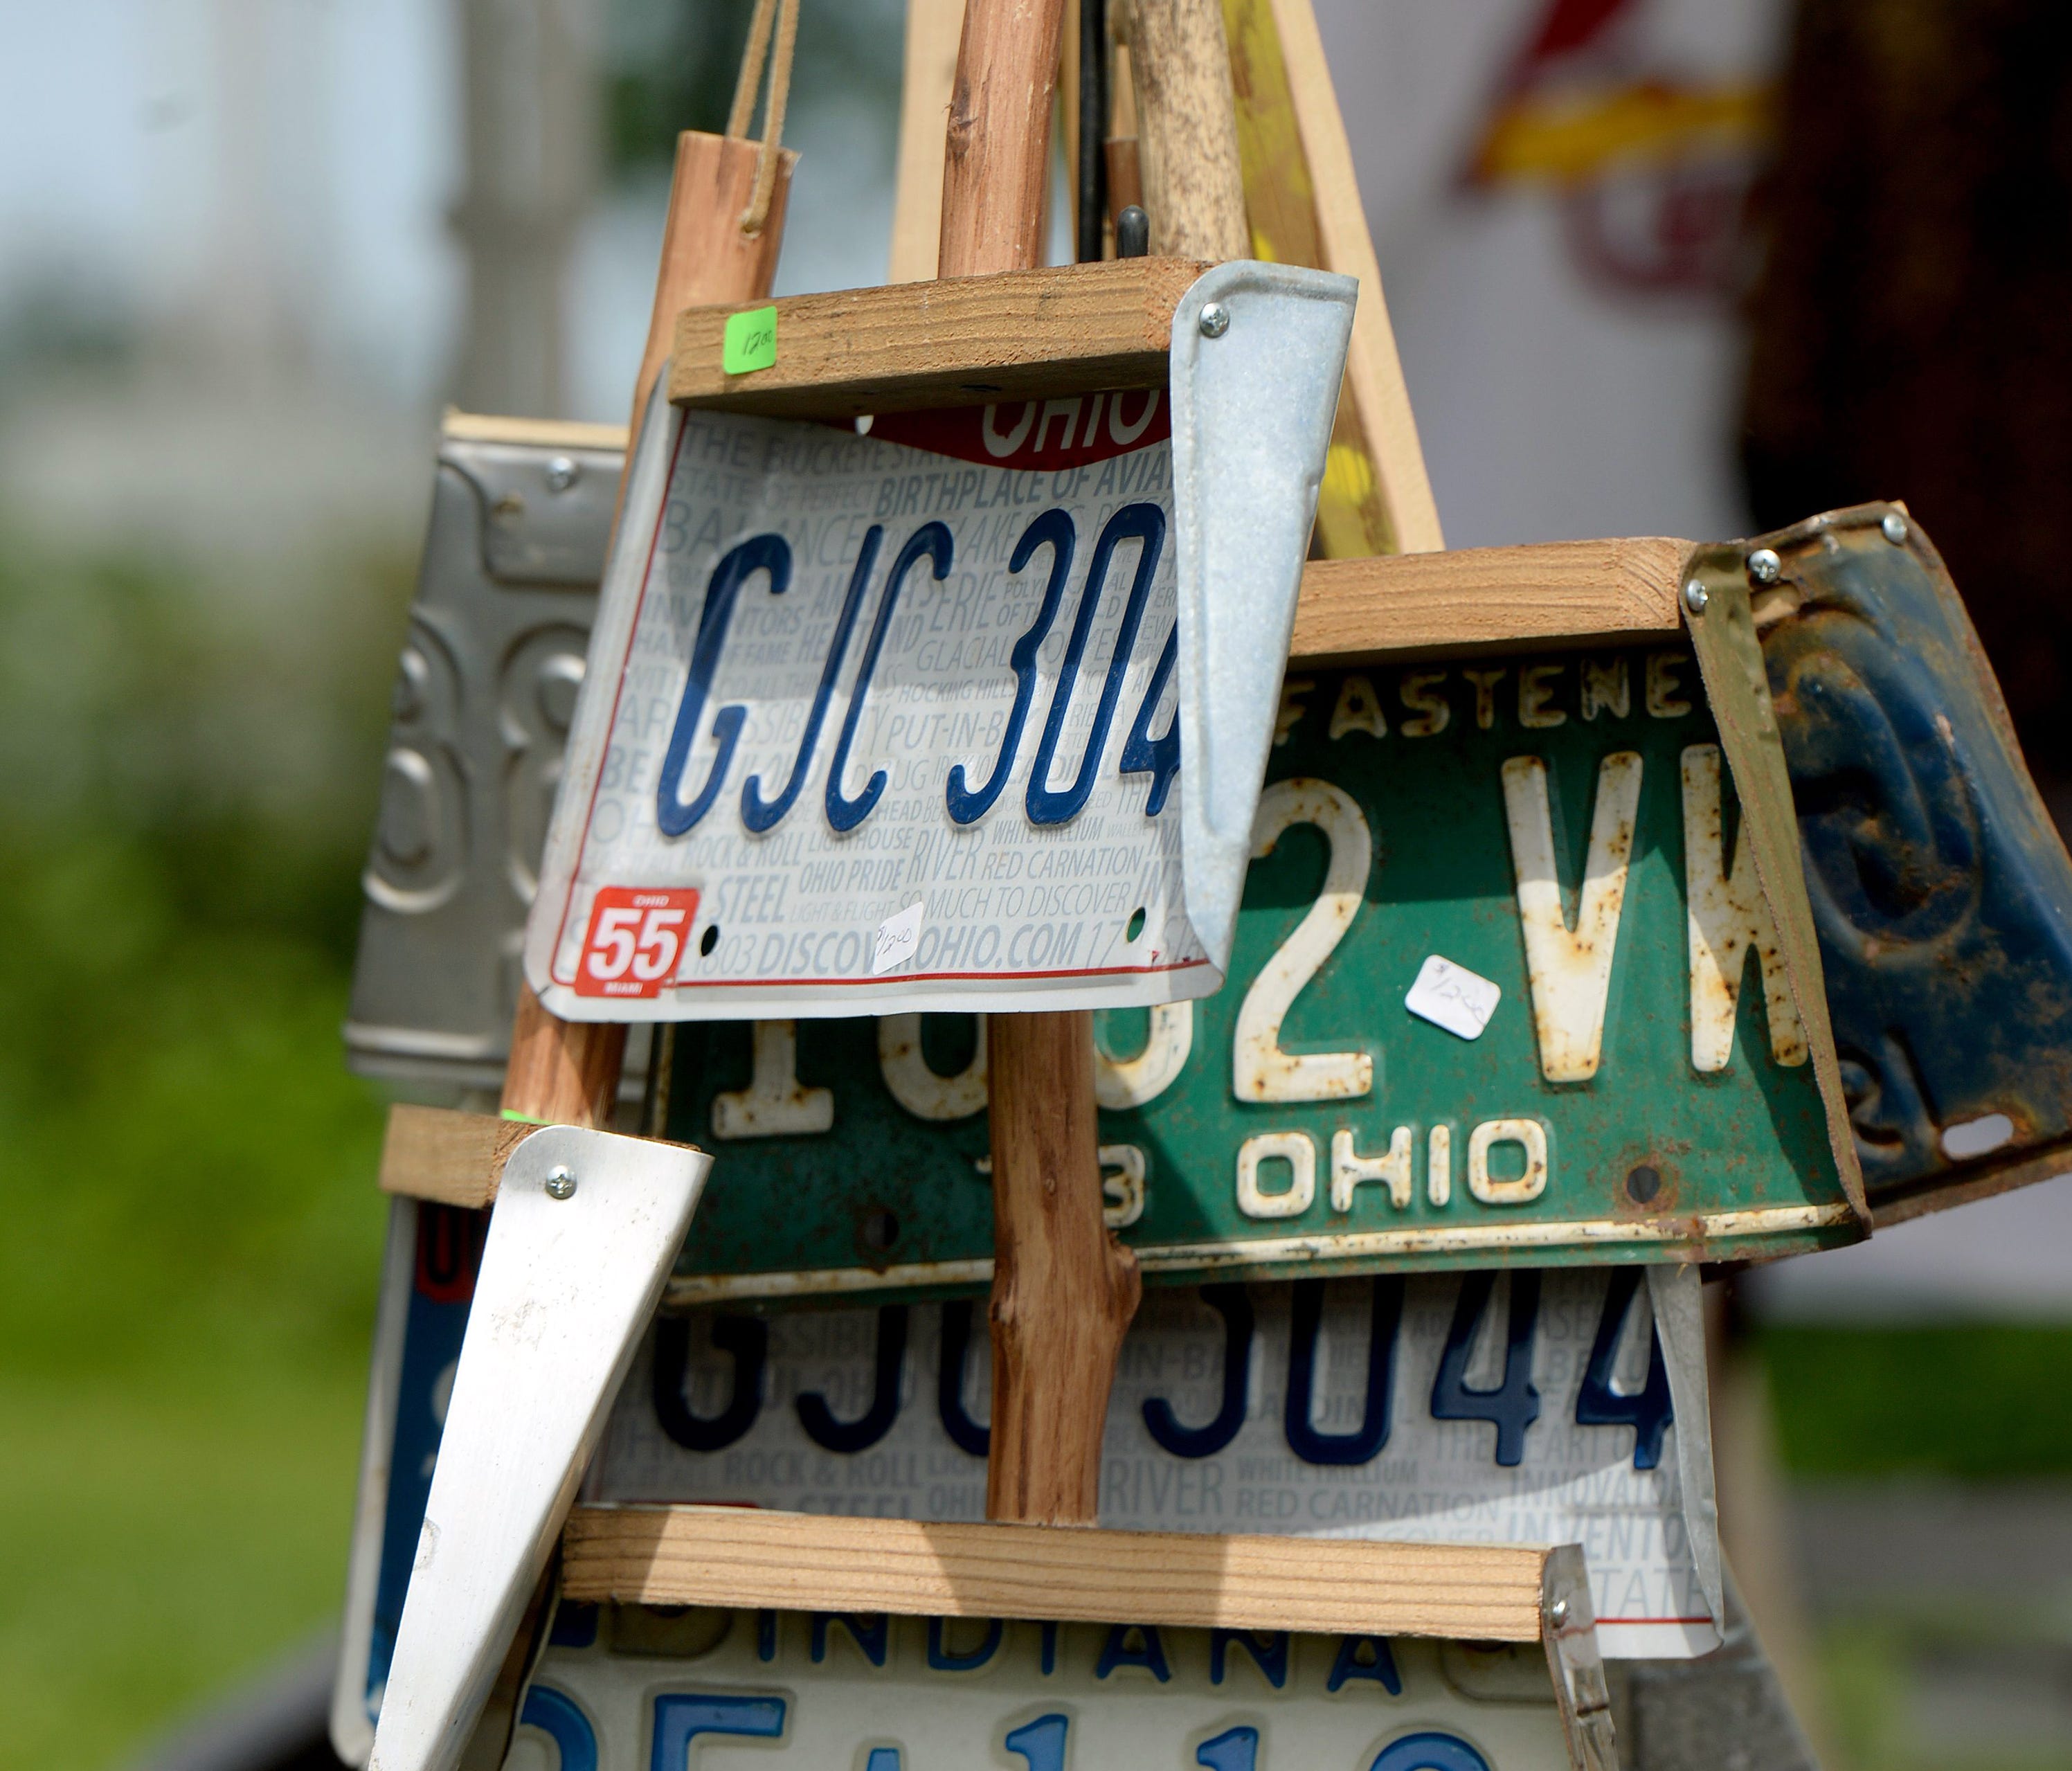 Expired license plates are recycled into dust pans at one Centerville, Ind., vendor's spot June 3, 2016, along the Historic National Road Yard Sale route.